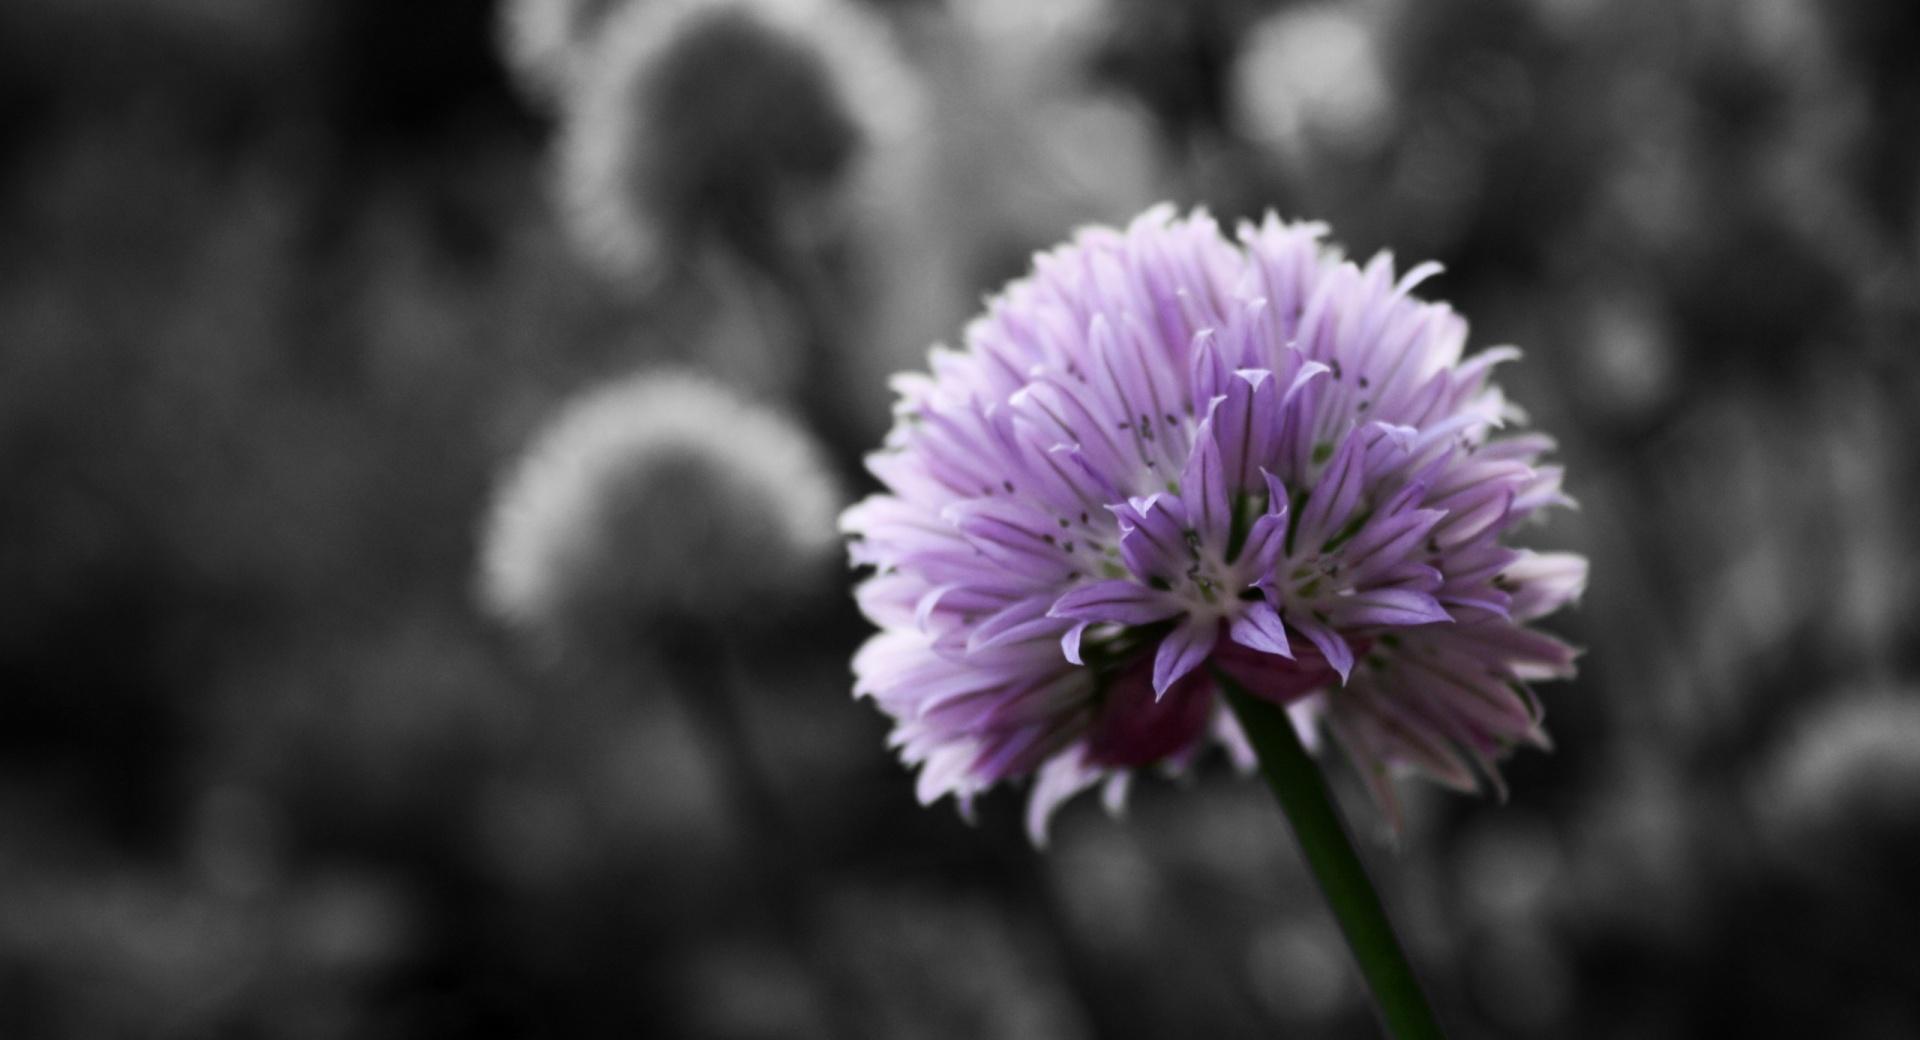 Purple Flower On Black And White Background wallpapers HD quality